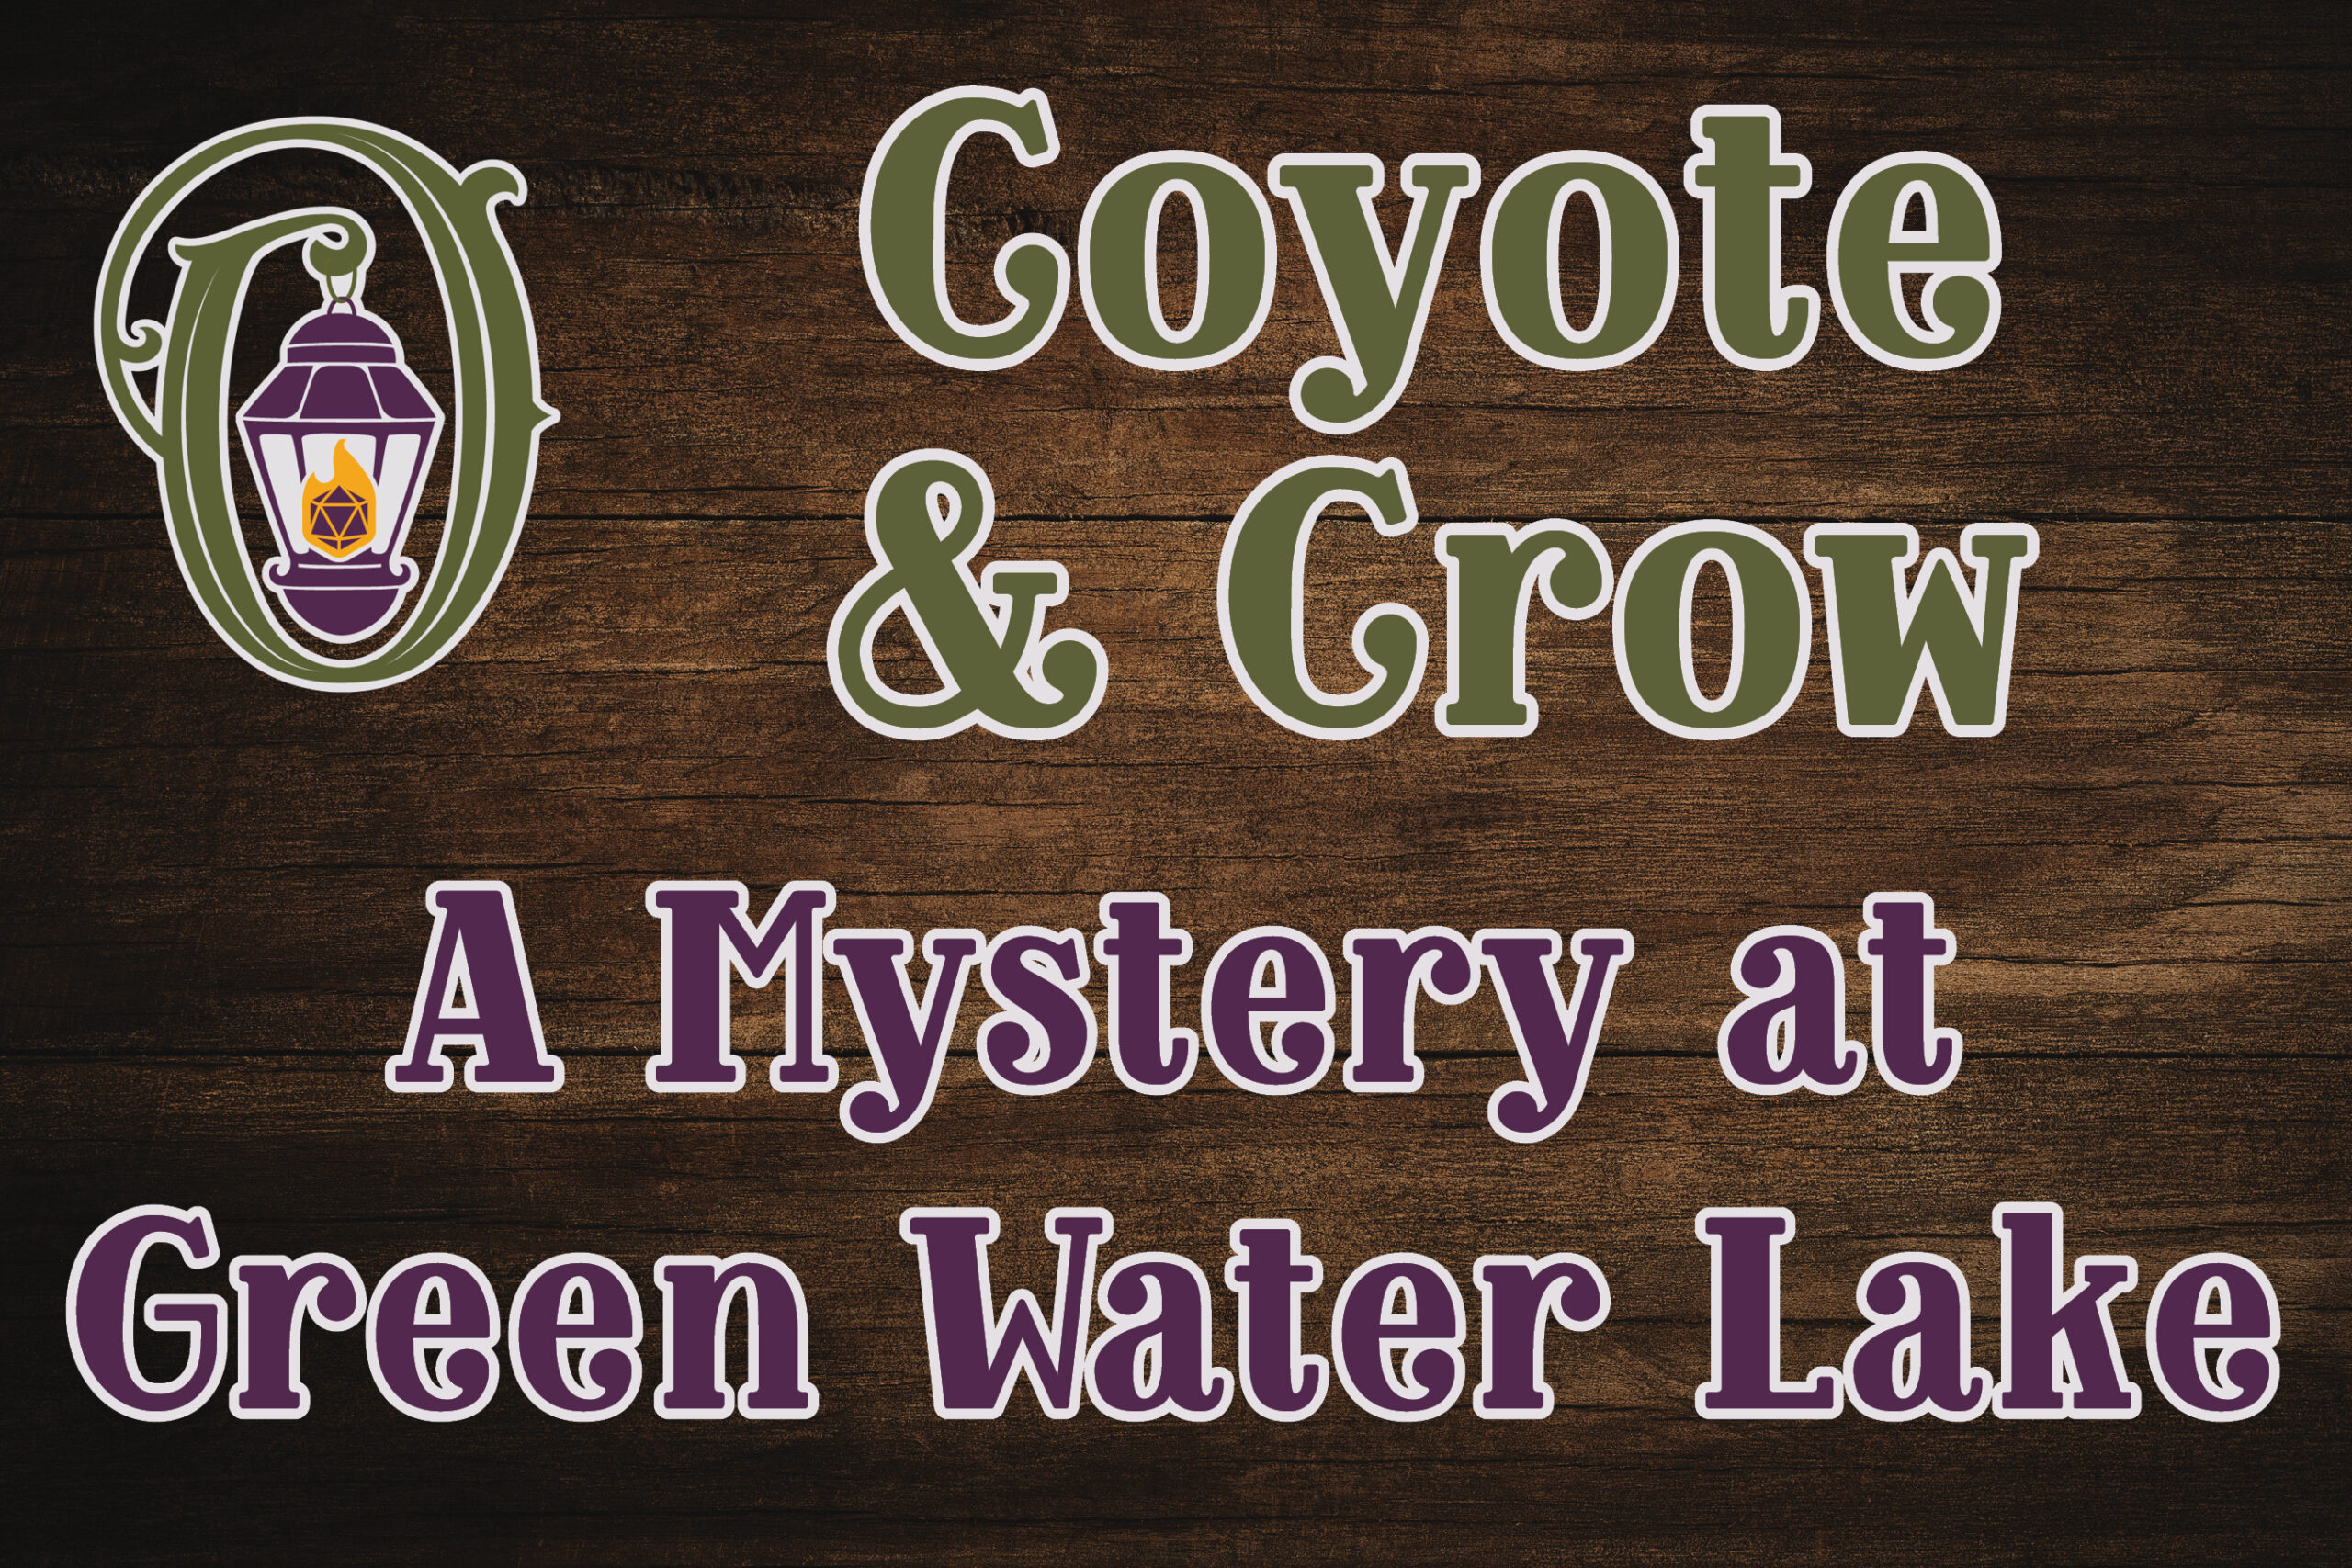 Coyote & Crow A Mystery at Green Water Lake